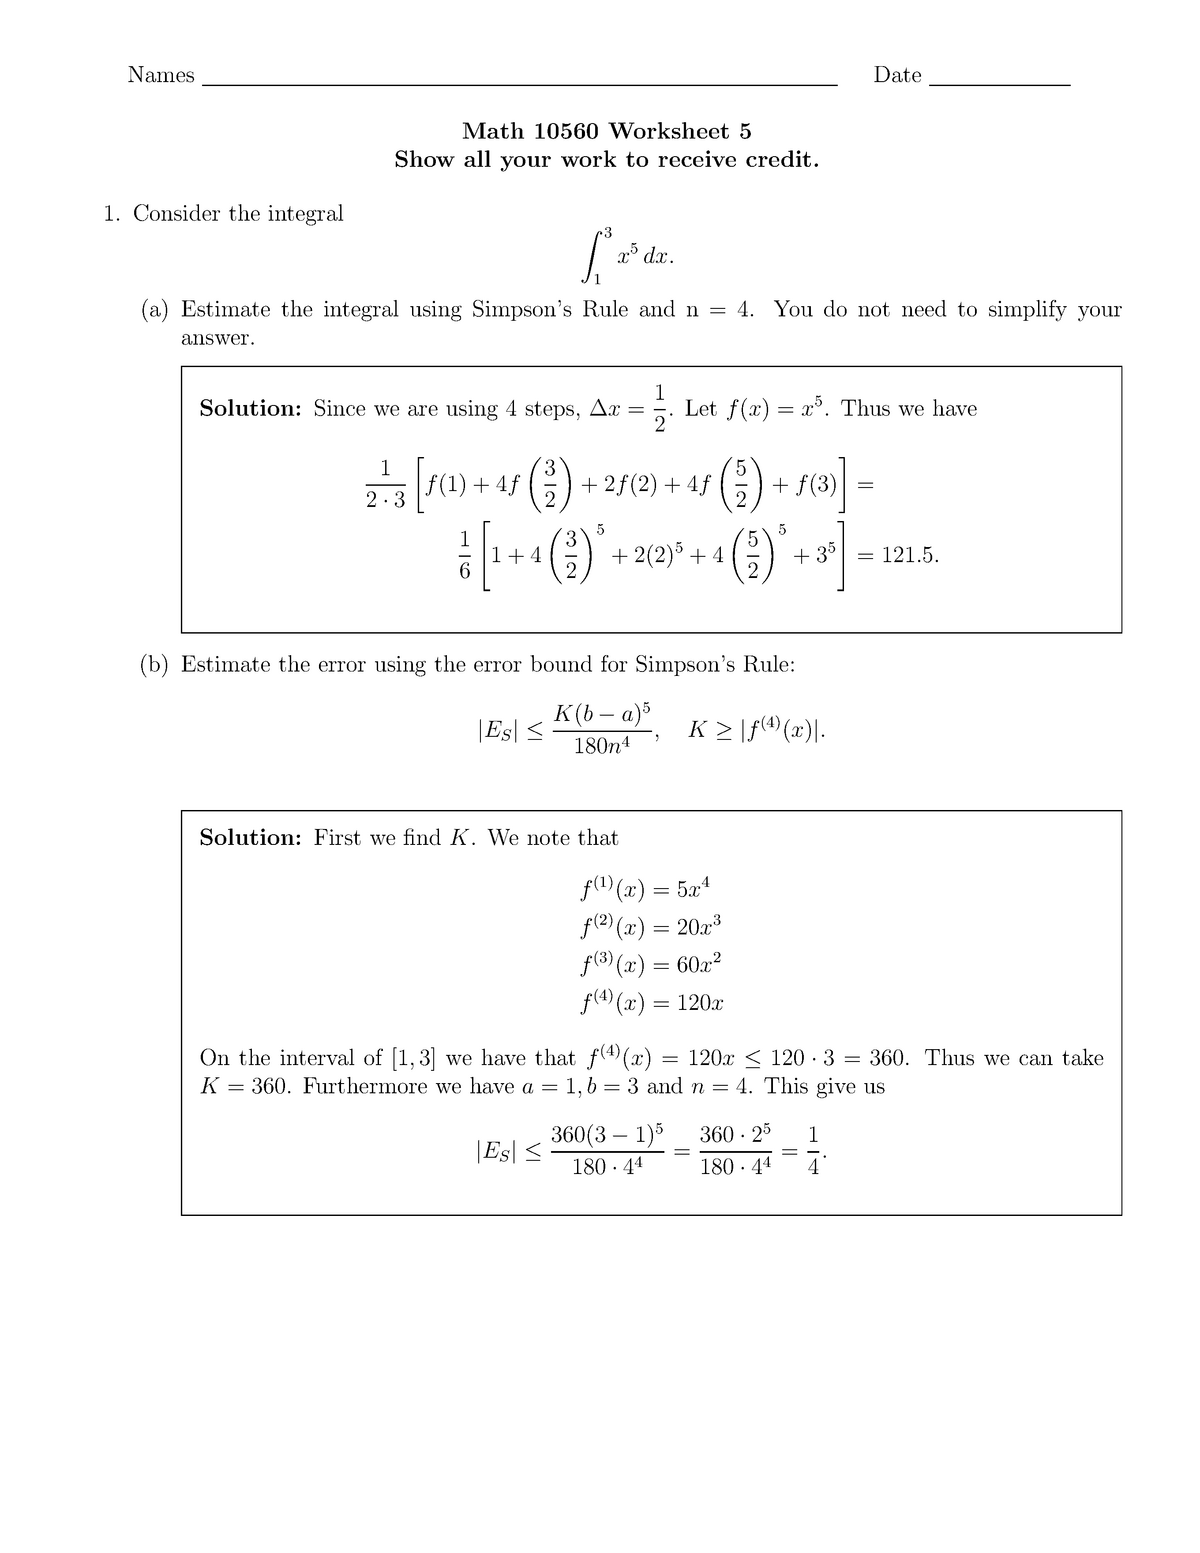 Worksheet 5 Solutions Names Date Math 10560 Worksheet 5 Show All Your Work To Receive Credit